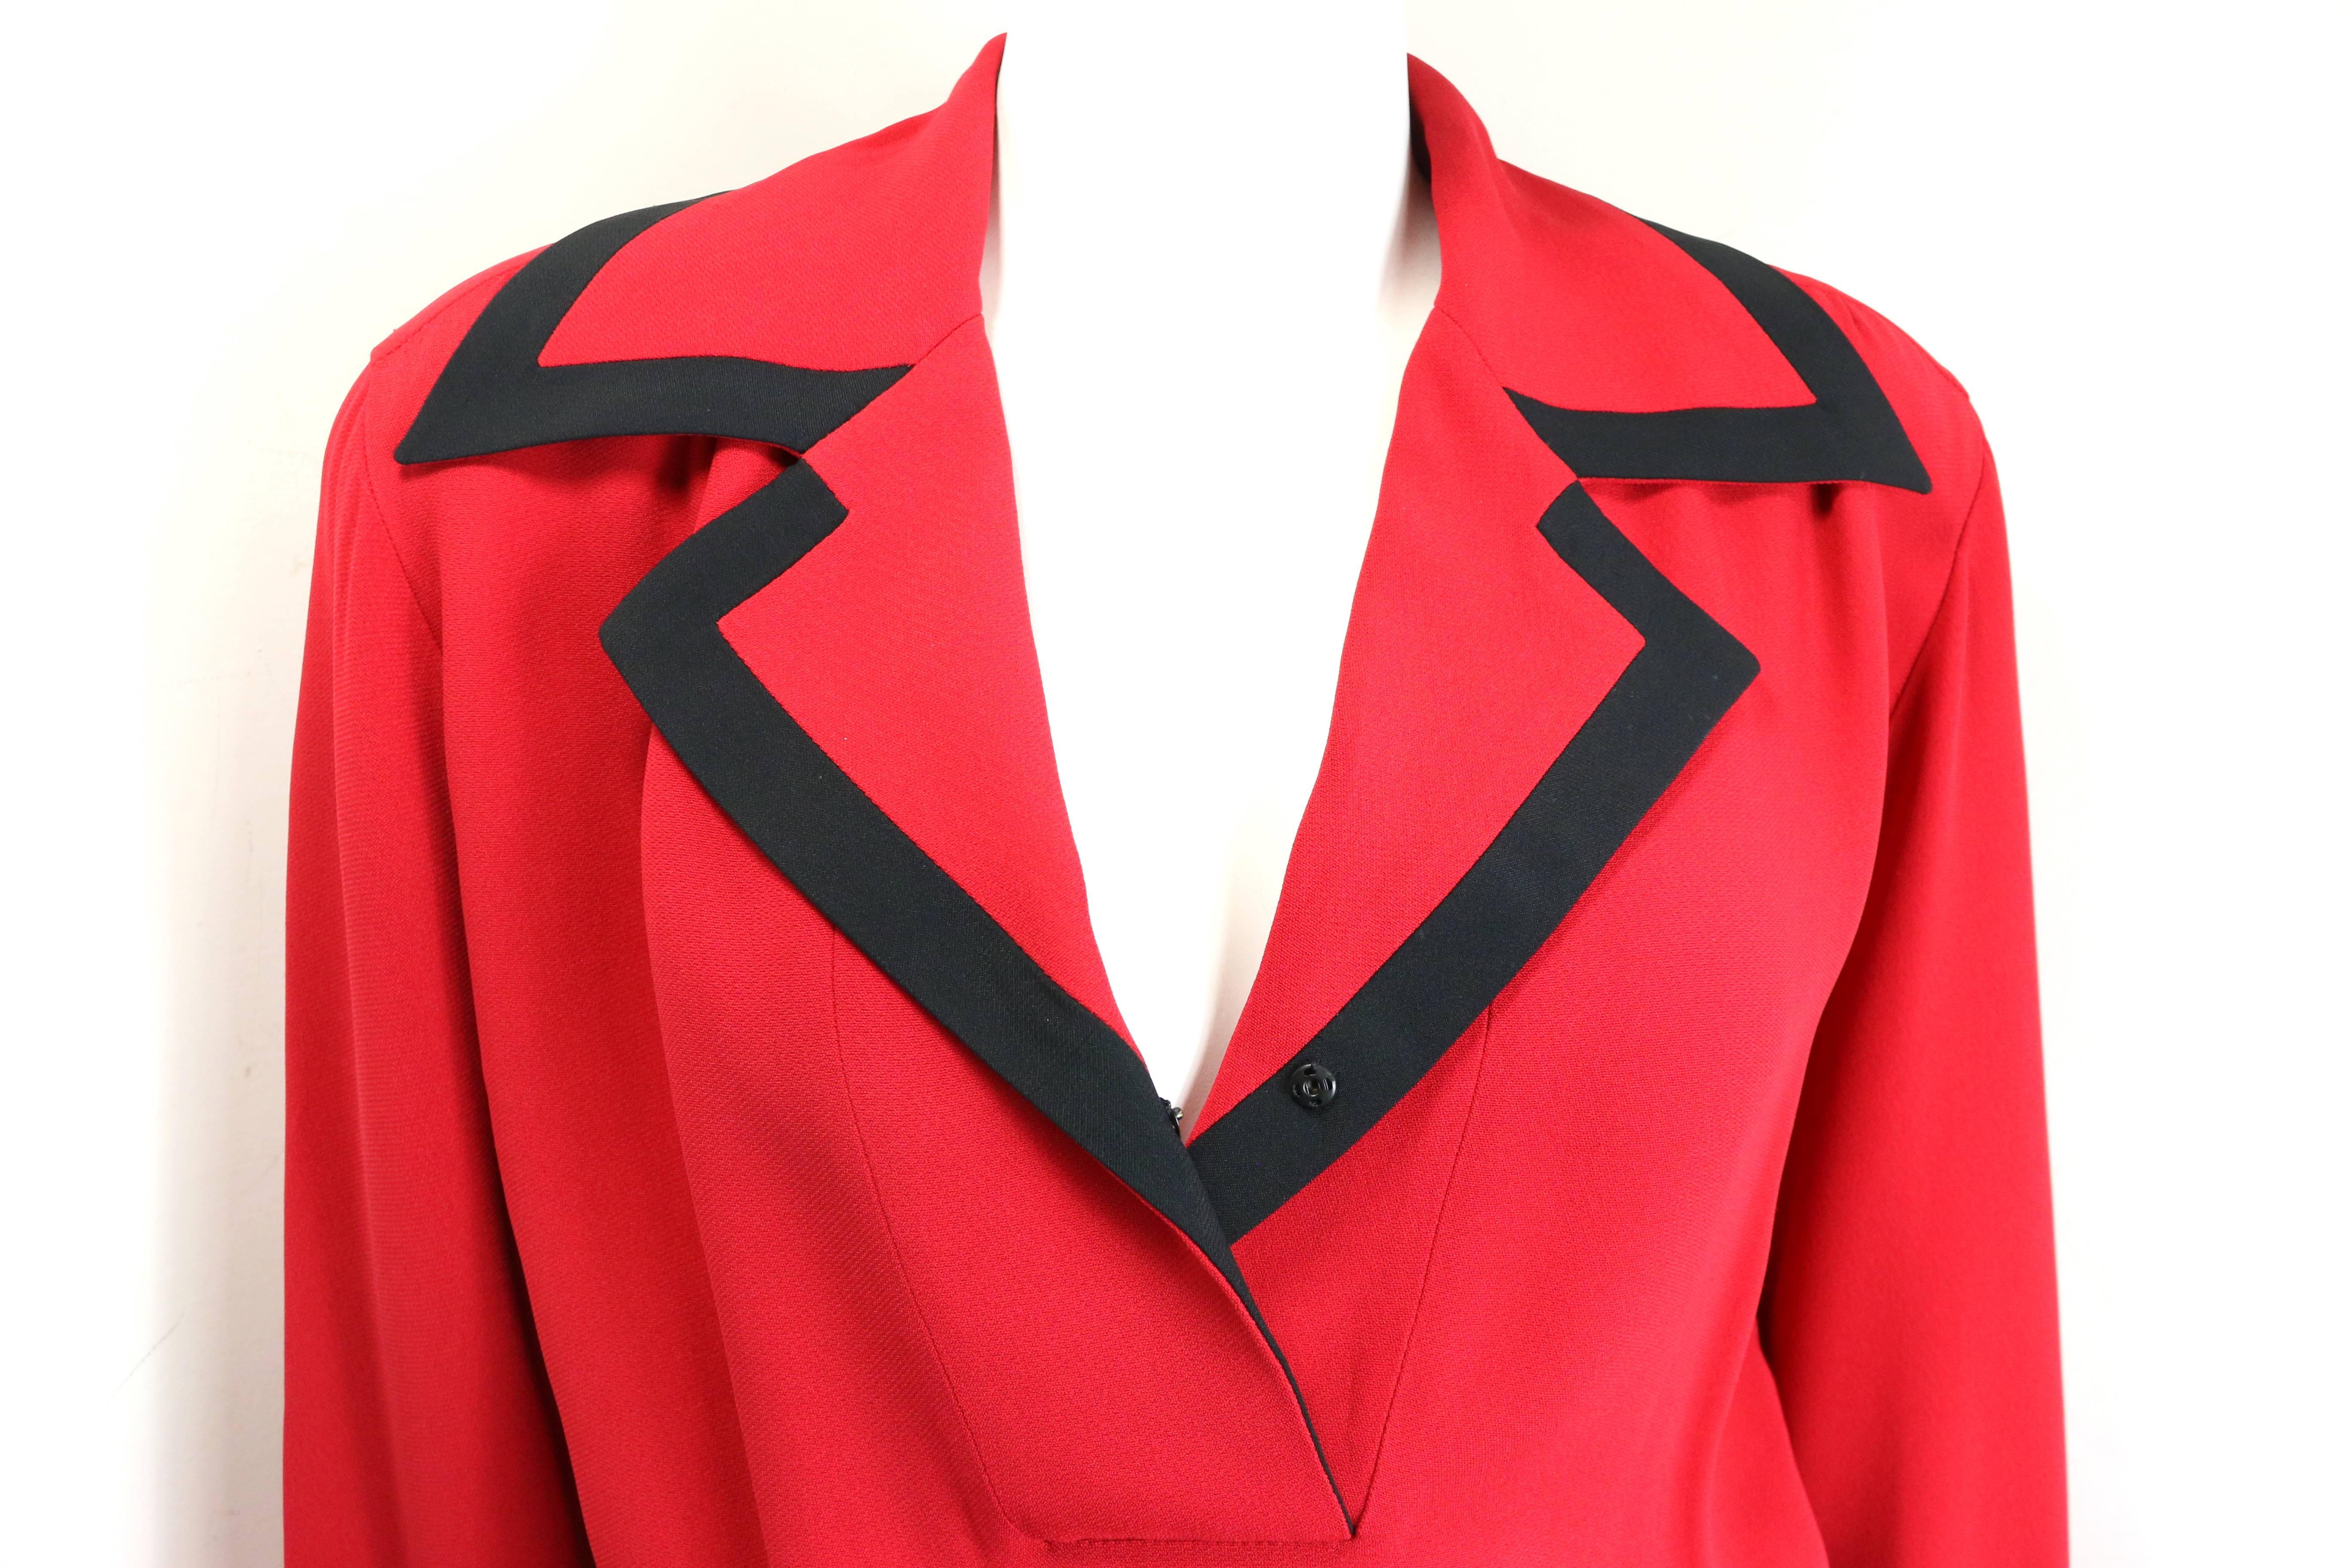 - Vintage 90s Moschino Couture red piping black trim long sleeves dress. 

- Collar lapel with snap button fastening. 

- Two piping black trim red open front pockets. 

- Cuffs button closure. Can flap the sleeves back in order to show the piping